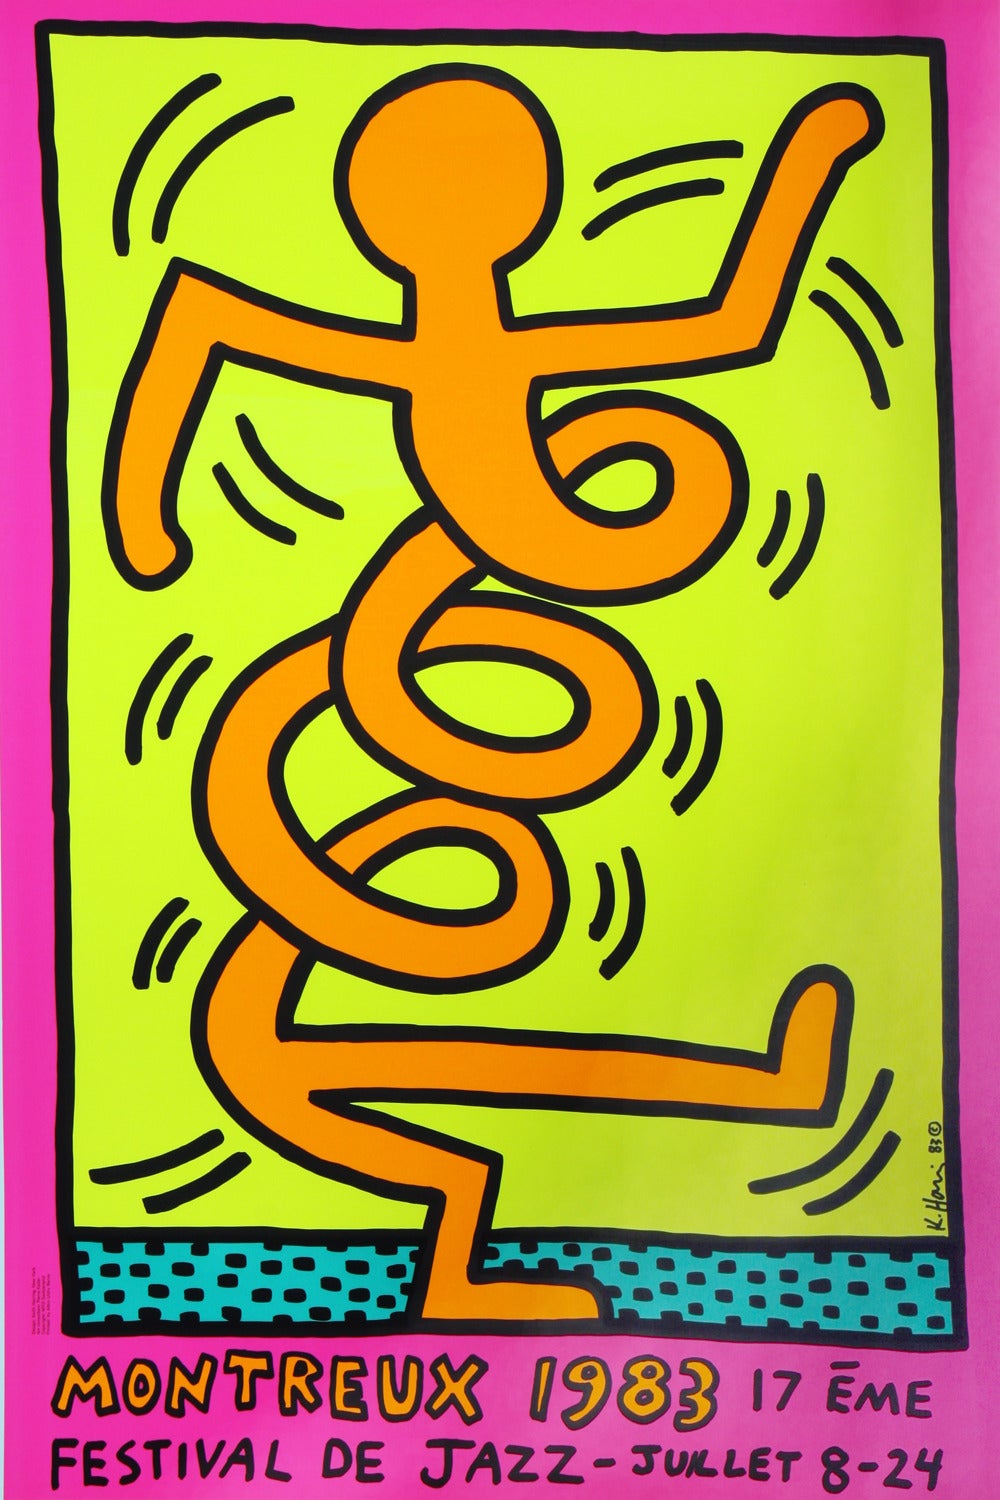 Keith Haring Print - Montreux Jazz Festival